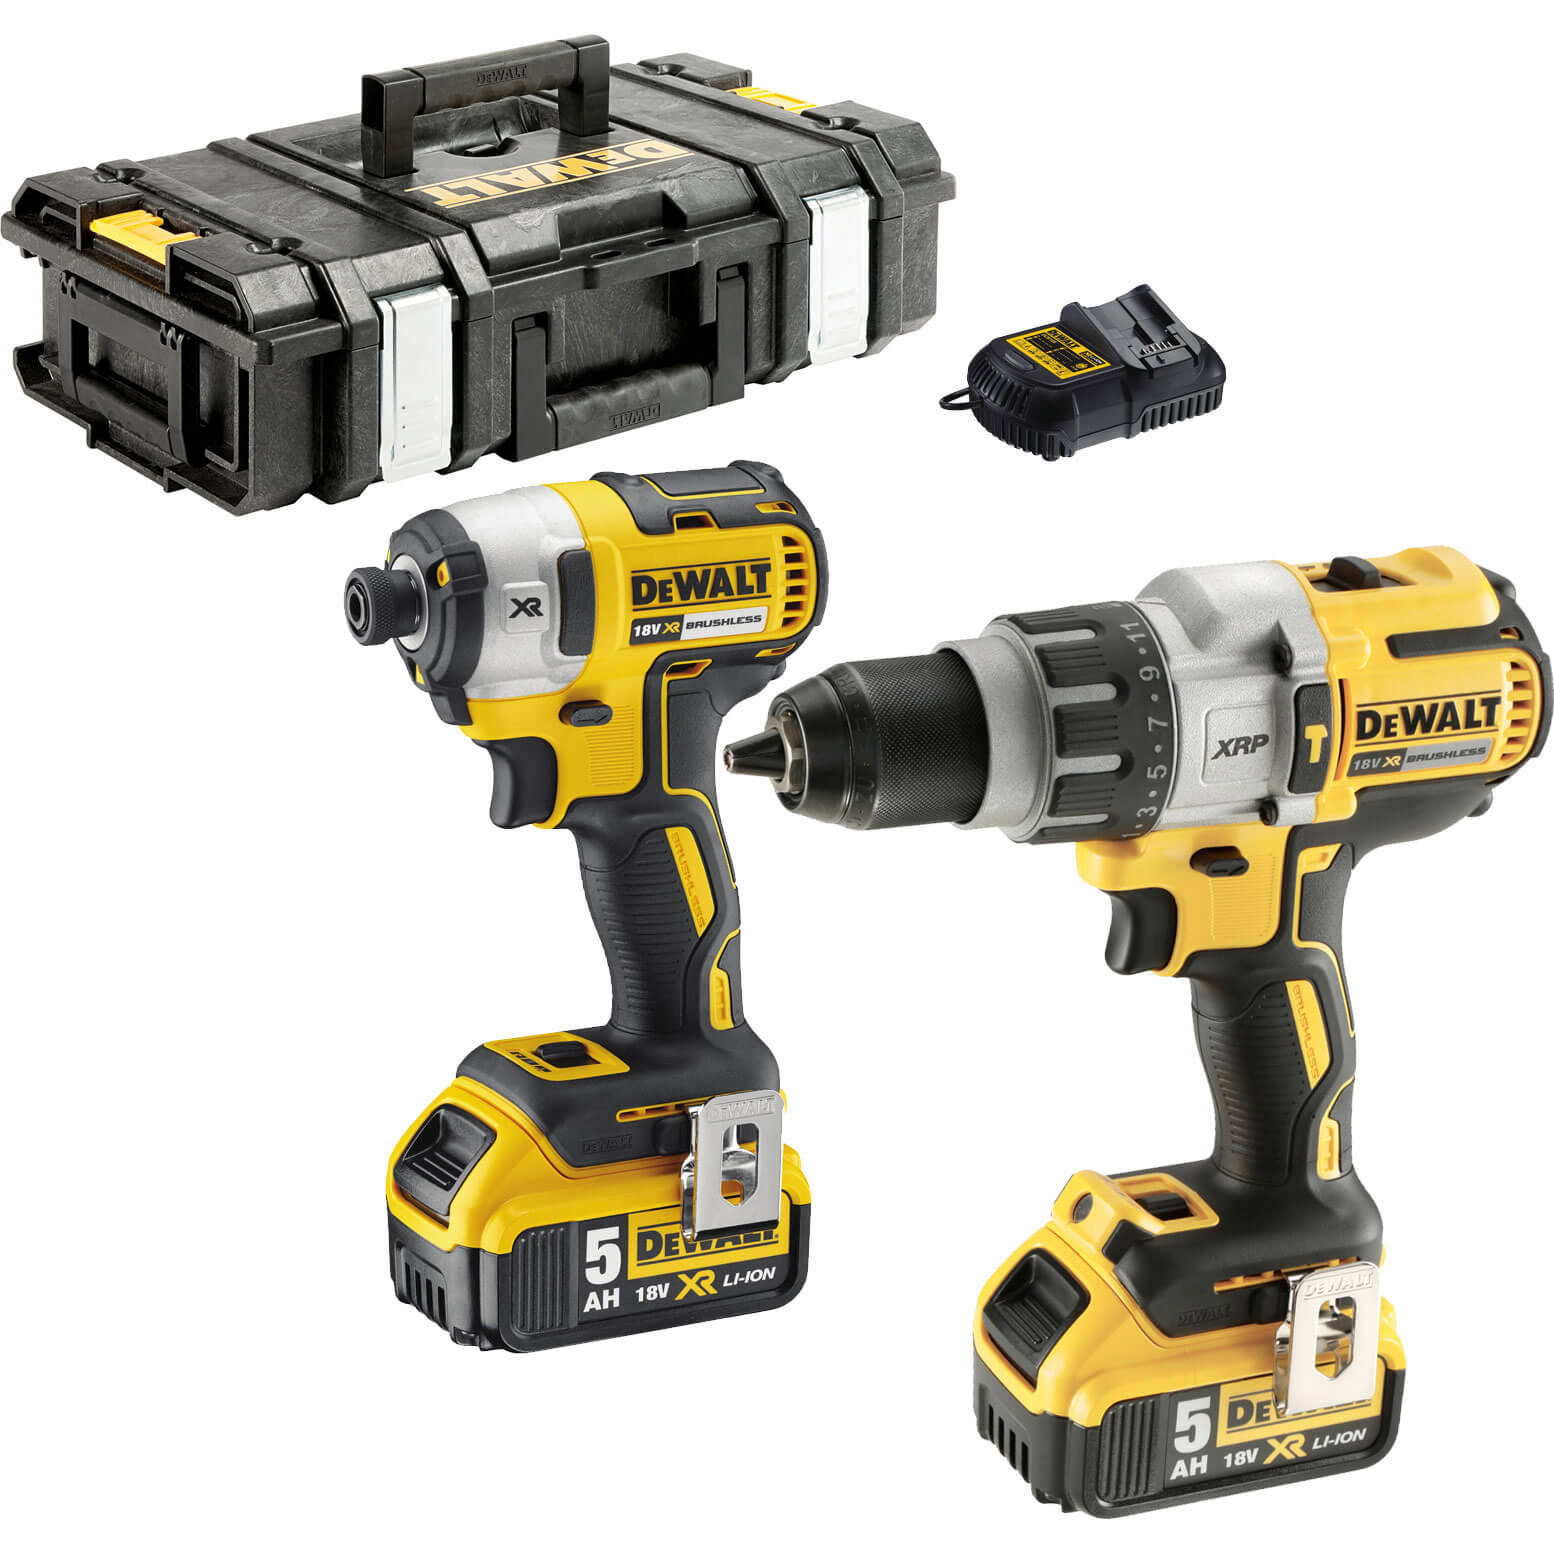 Image of DeWalt DCK276 18v XR Cordless Brushless Combi Drill and Impact Driver 2 x 5ah Li-ion Charger Case